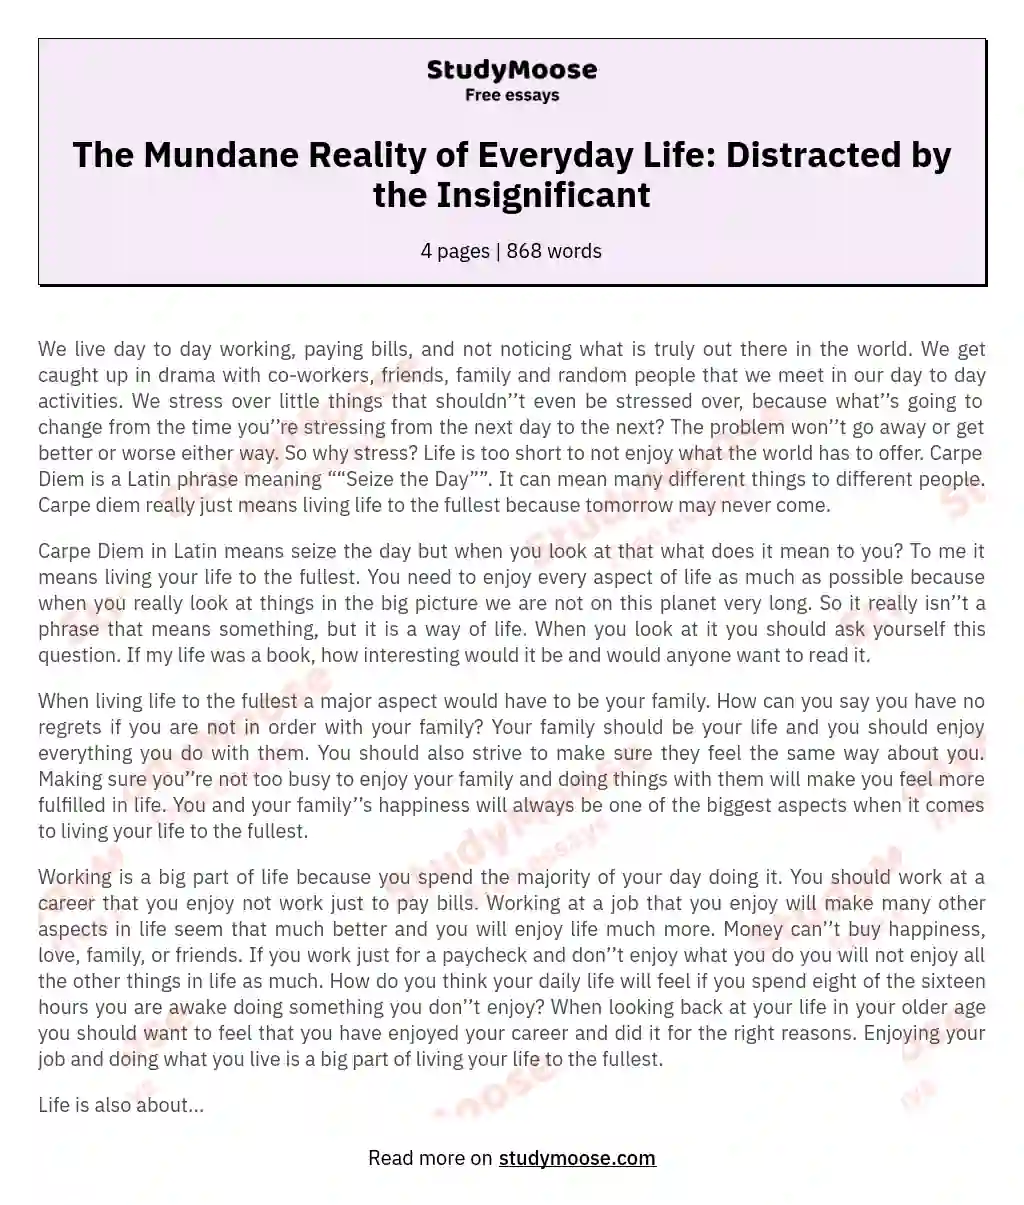 The Mundane Reality of Everyday Life: Distracted by the Insignificant essay